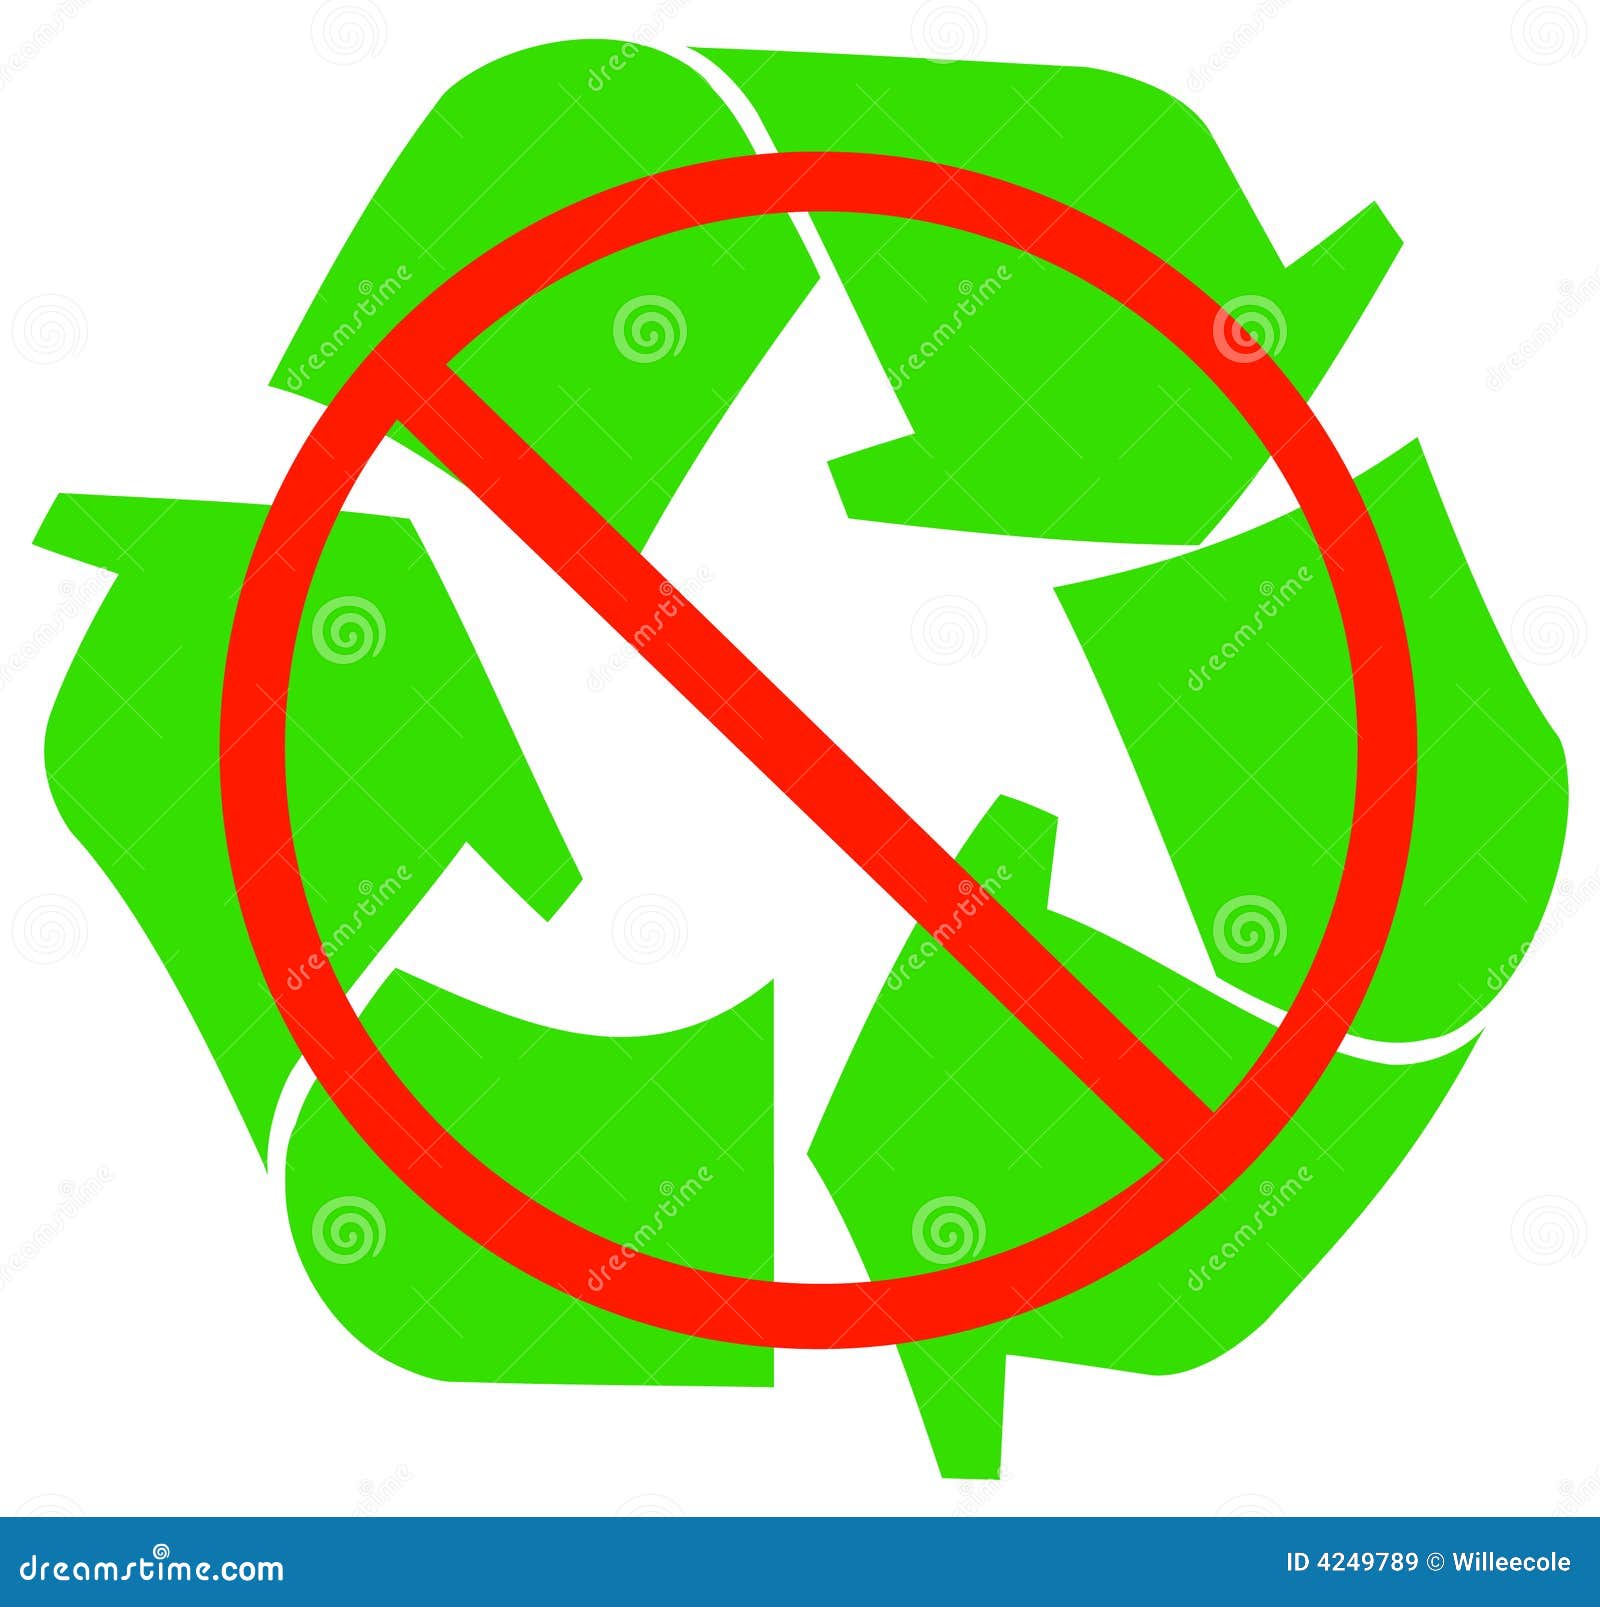 Garbage collection business plans